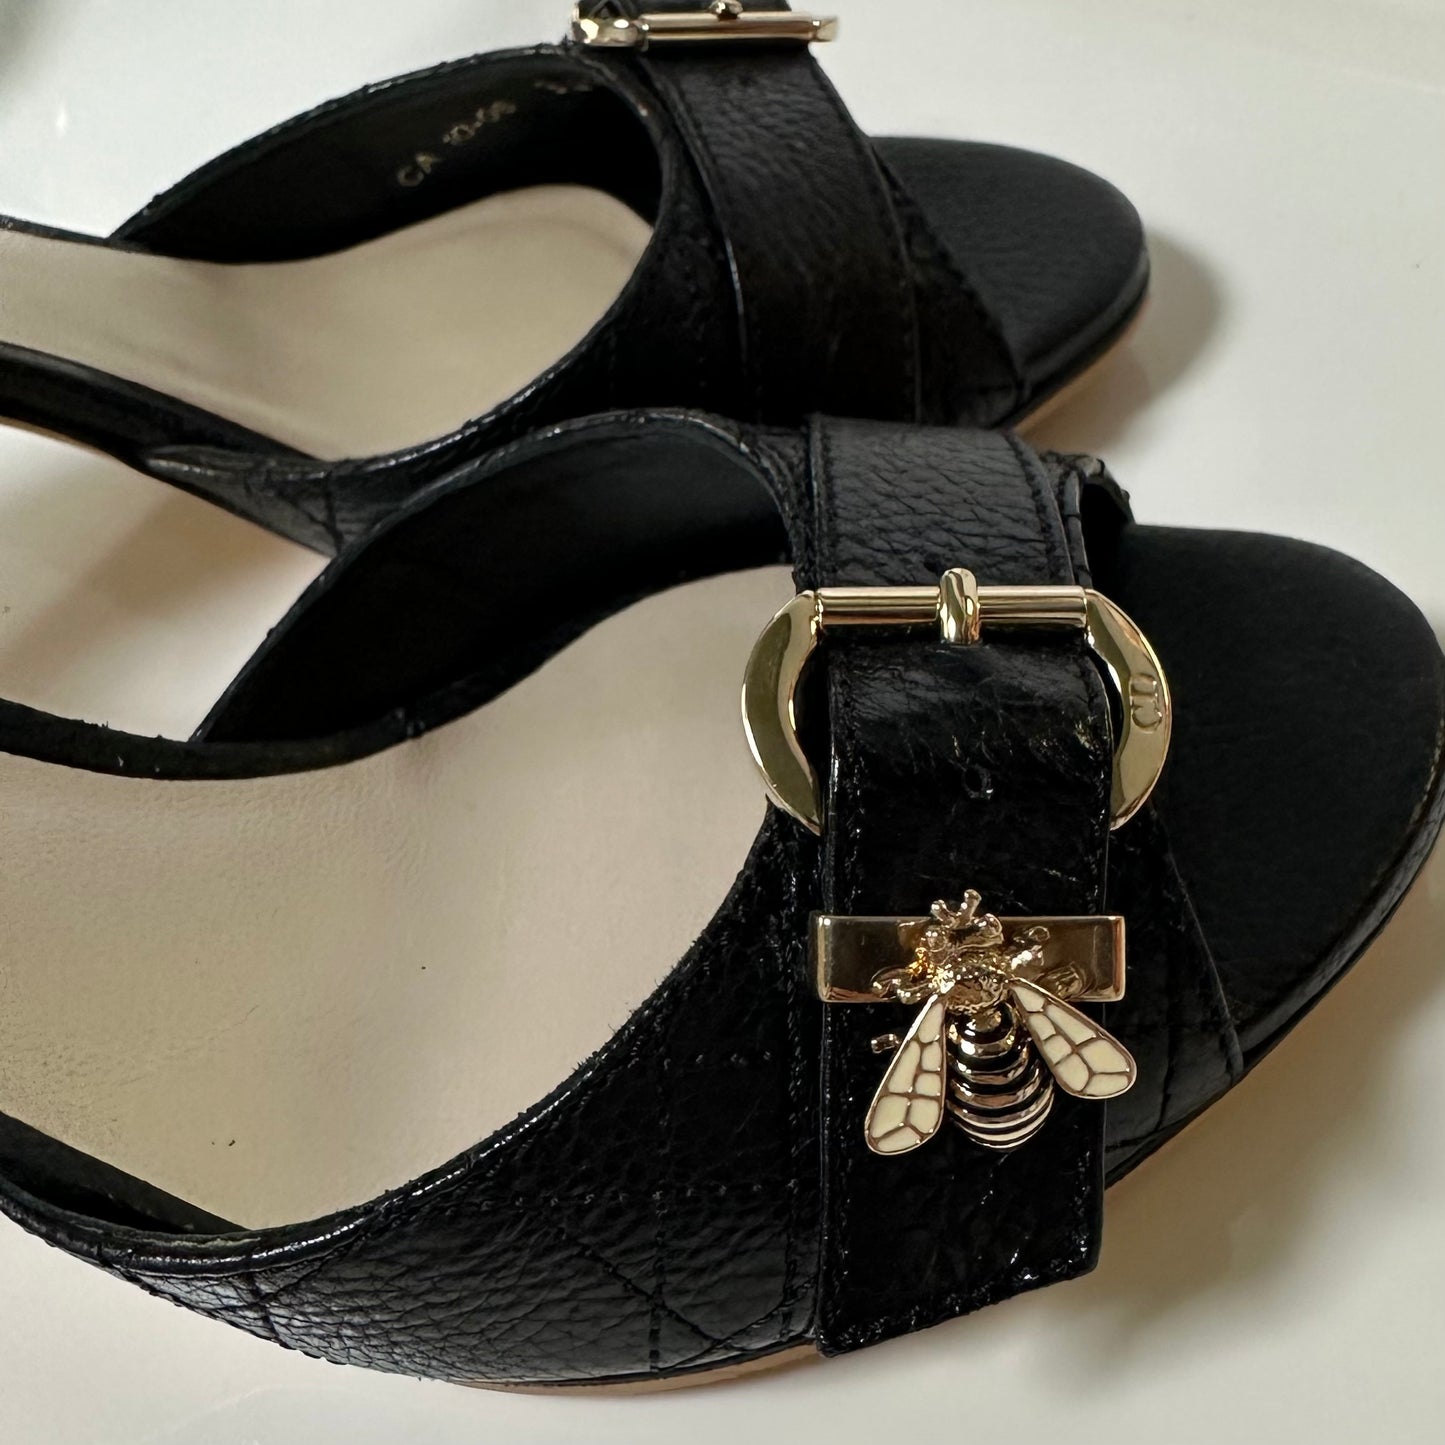 CHRISTIAN DIOR "Bee" Details Leather Sandals